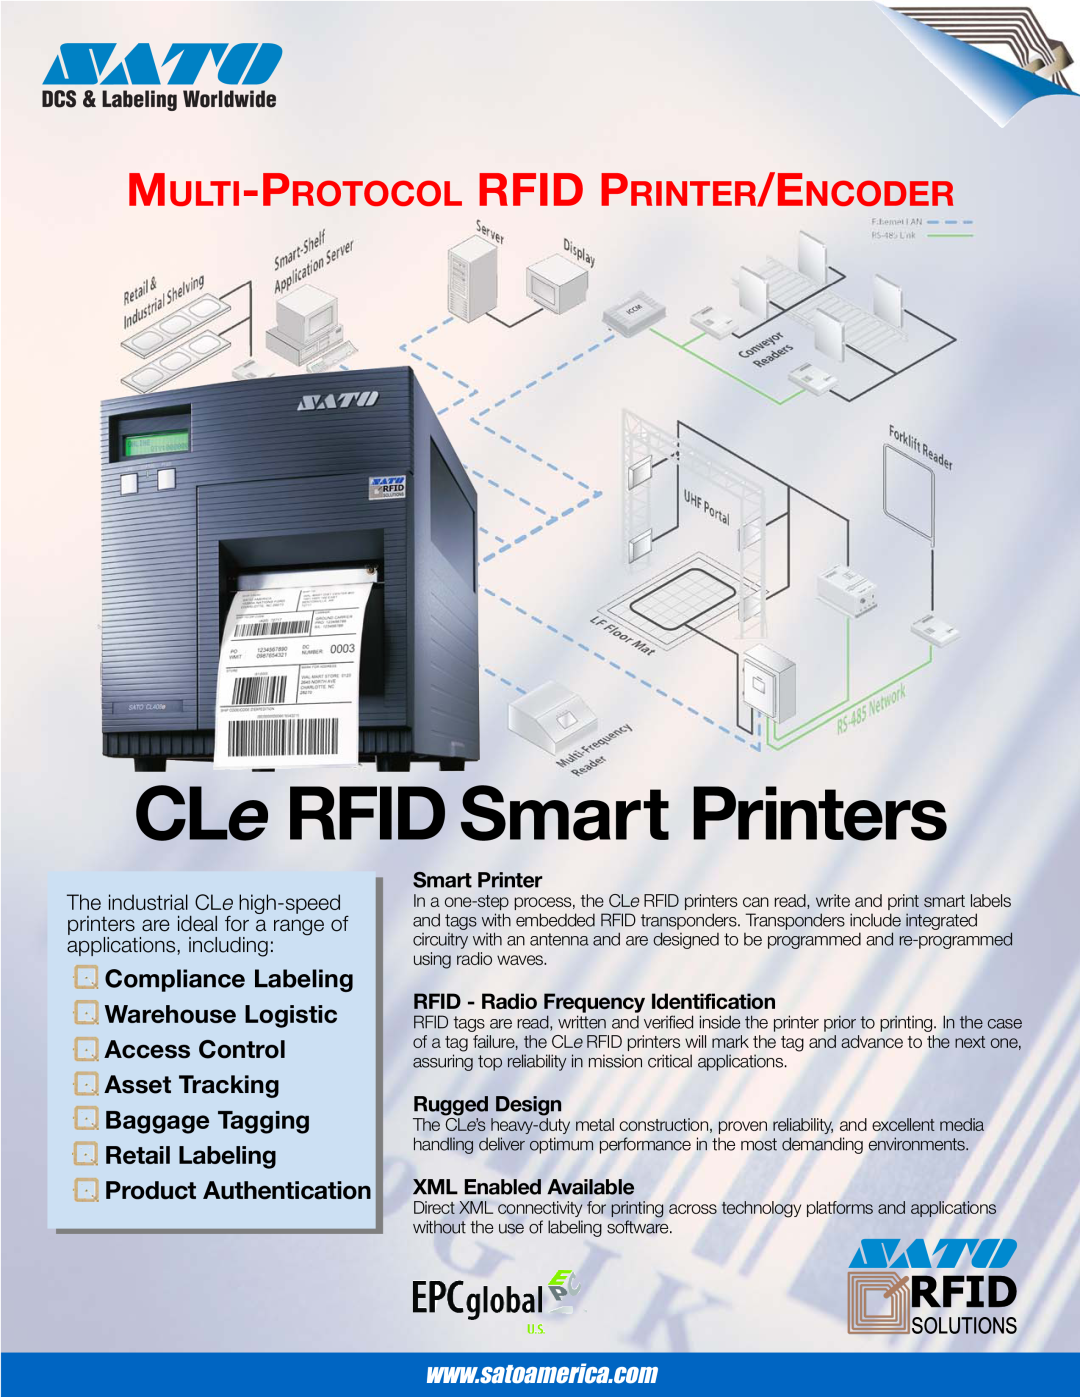 SATO CLe RFID manual Smart Printer, RFID - Radio Frequency Identification, Rugged Design, XML Enabled Available 